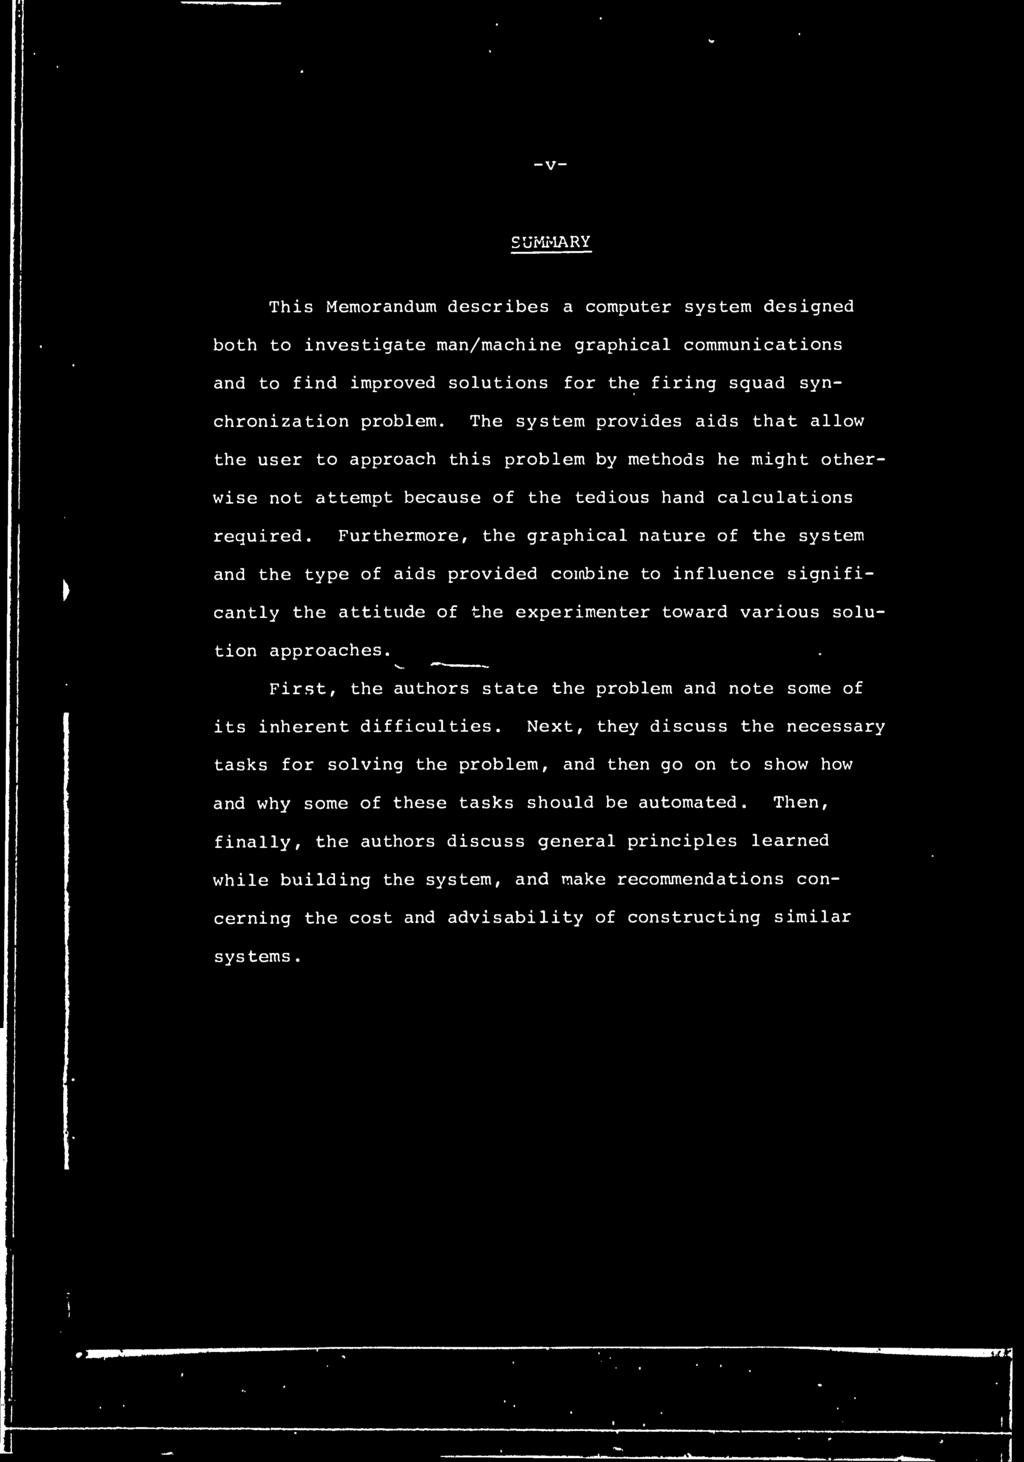 -v- : UMMARY This Memorandum describes a computer system designed both to investigate man/machine graphical communications and to find improved solutions for the firing squad synchronization problem.